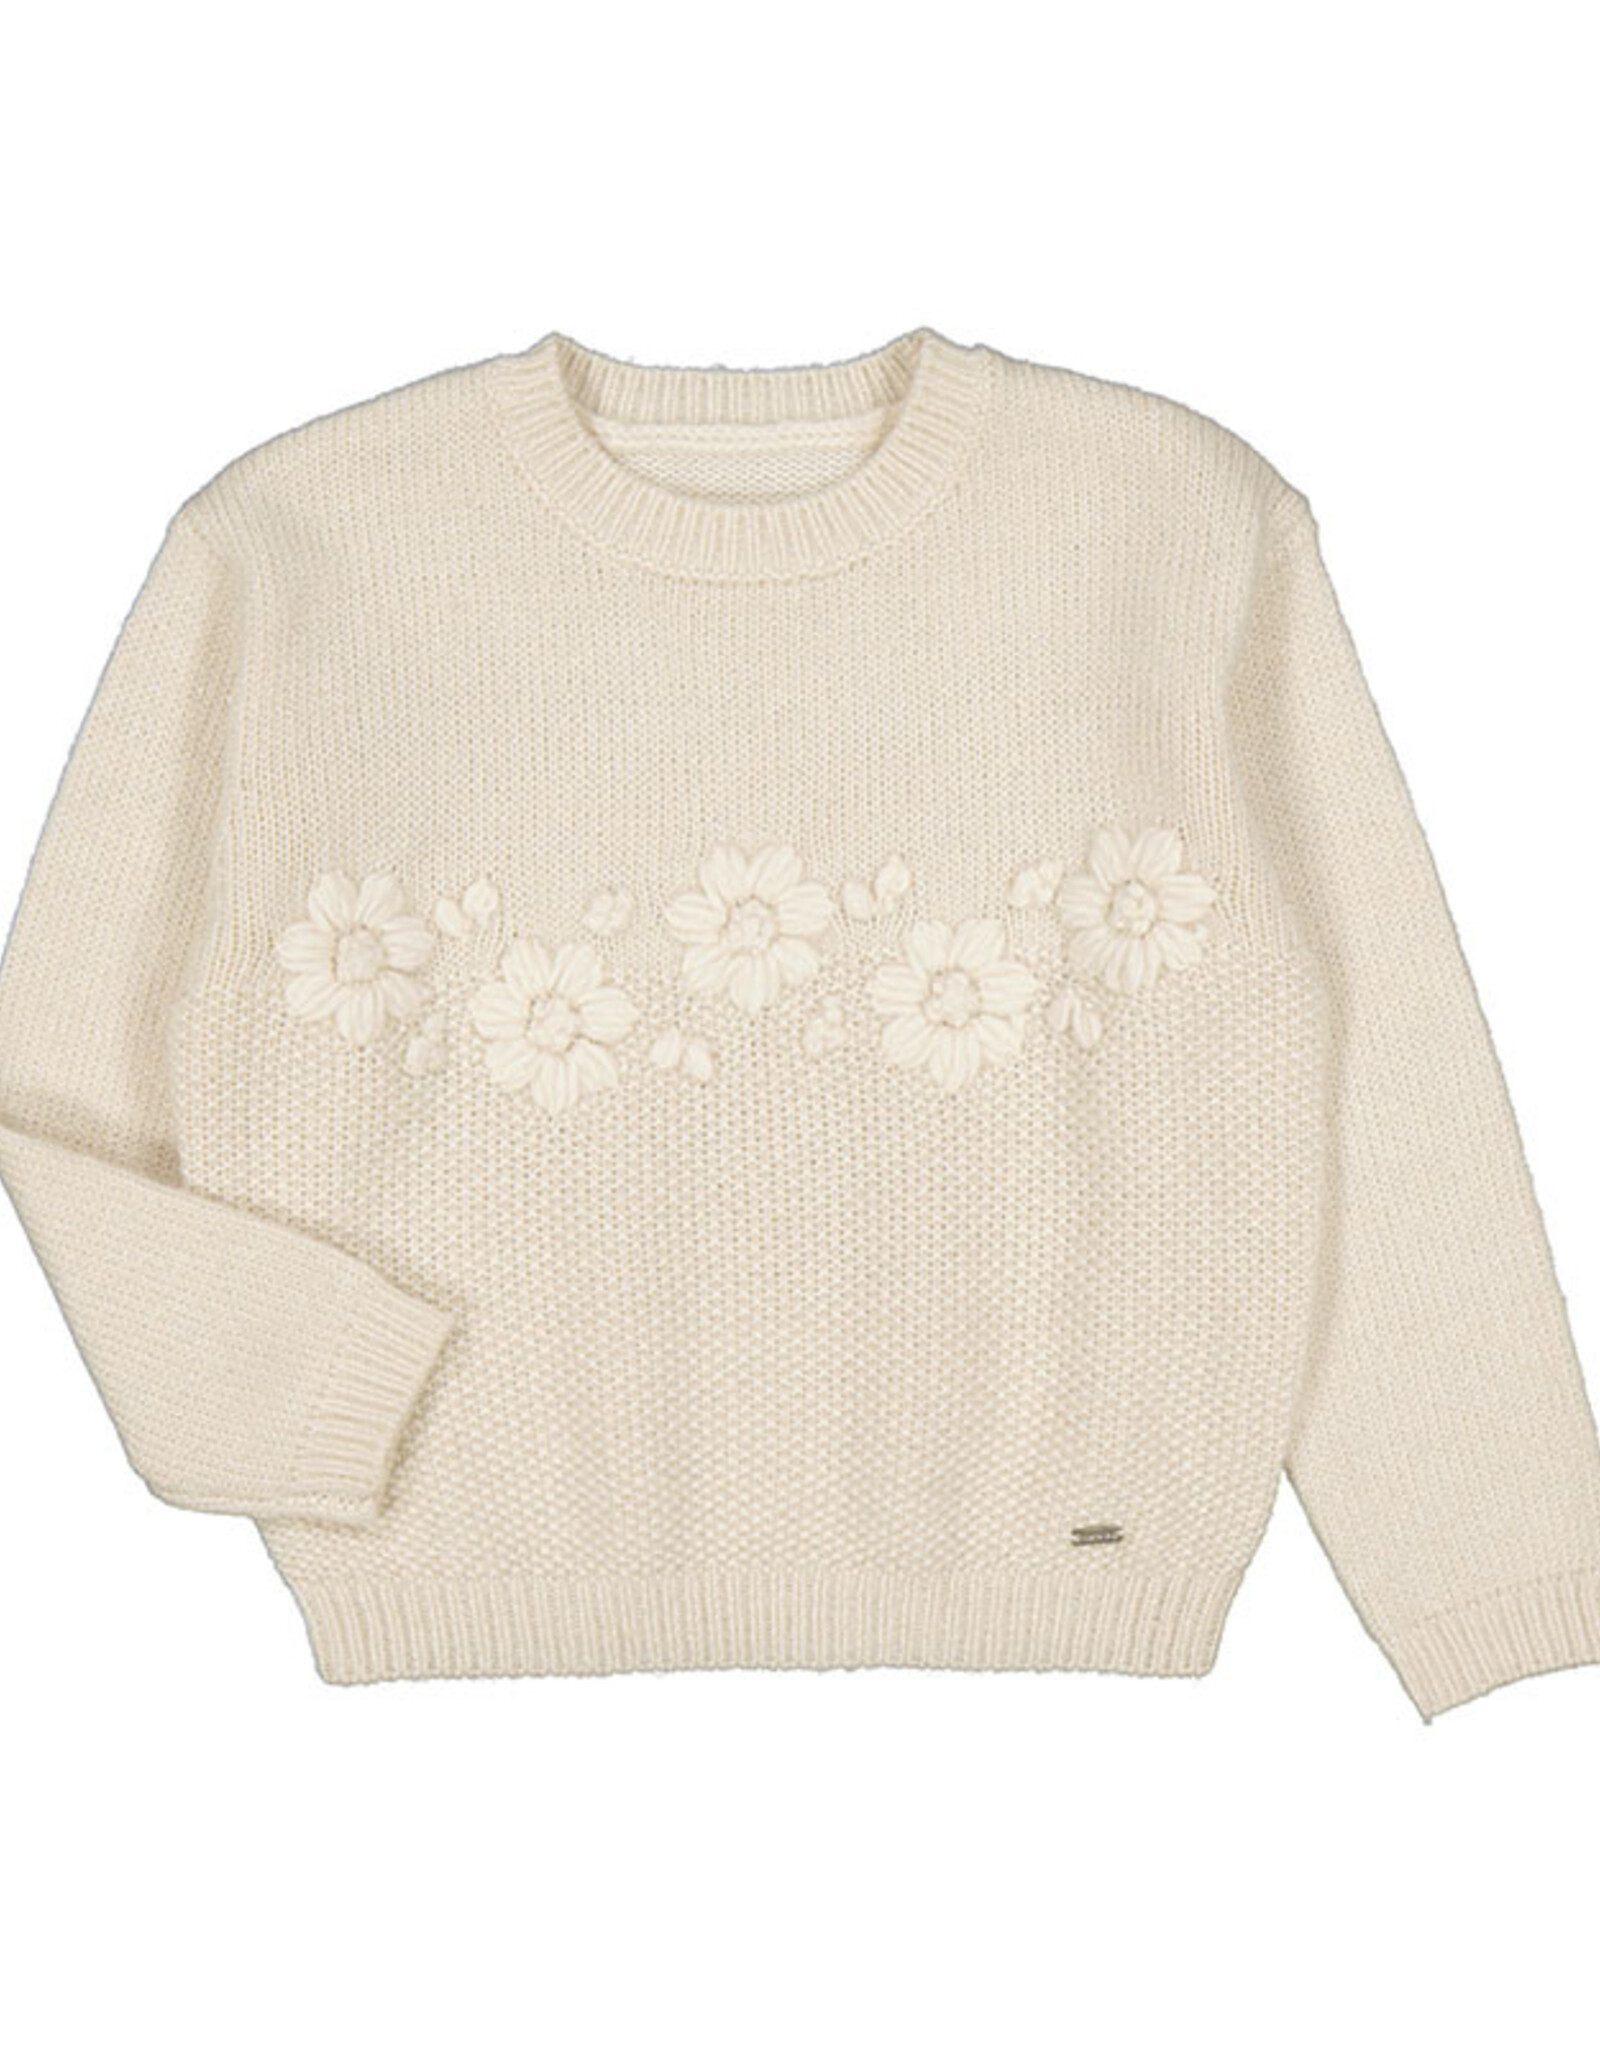 Mayoral Ivory Sweater with Floral Tone Detail